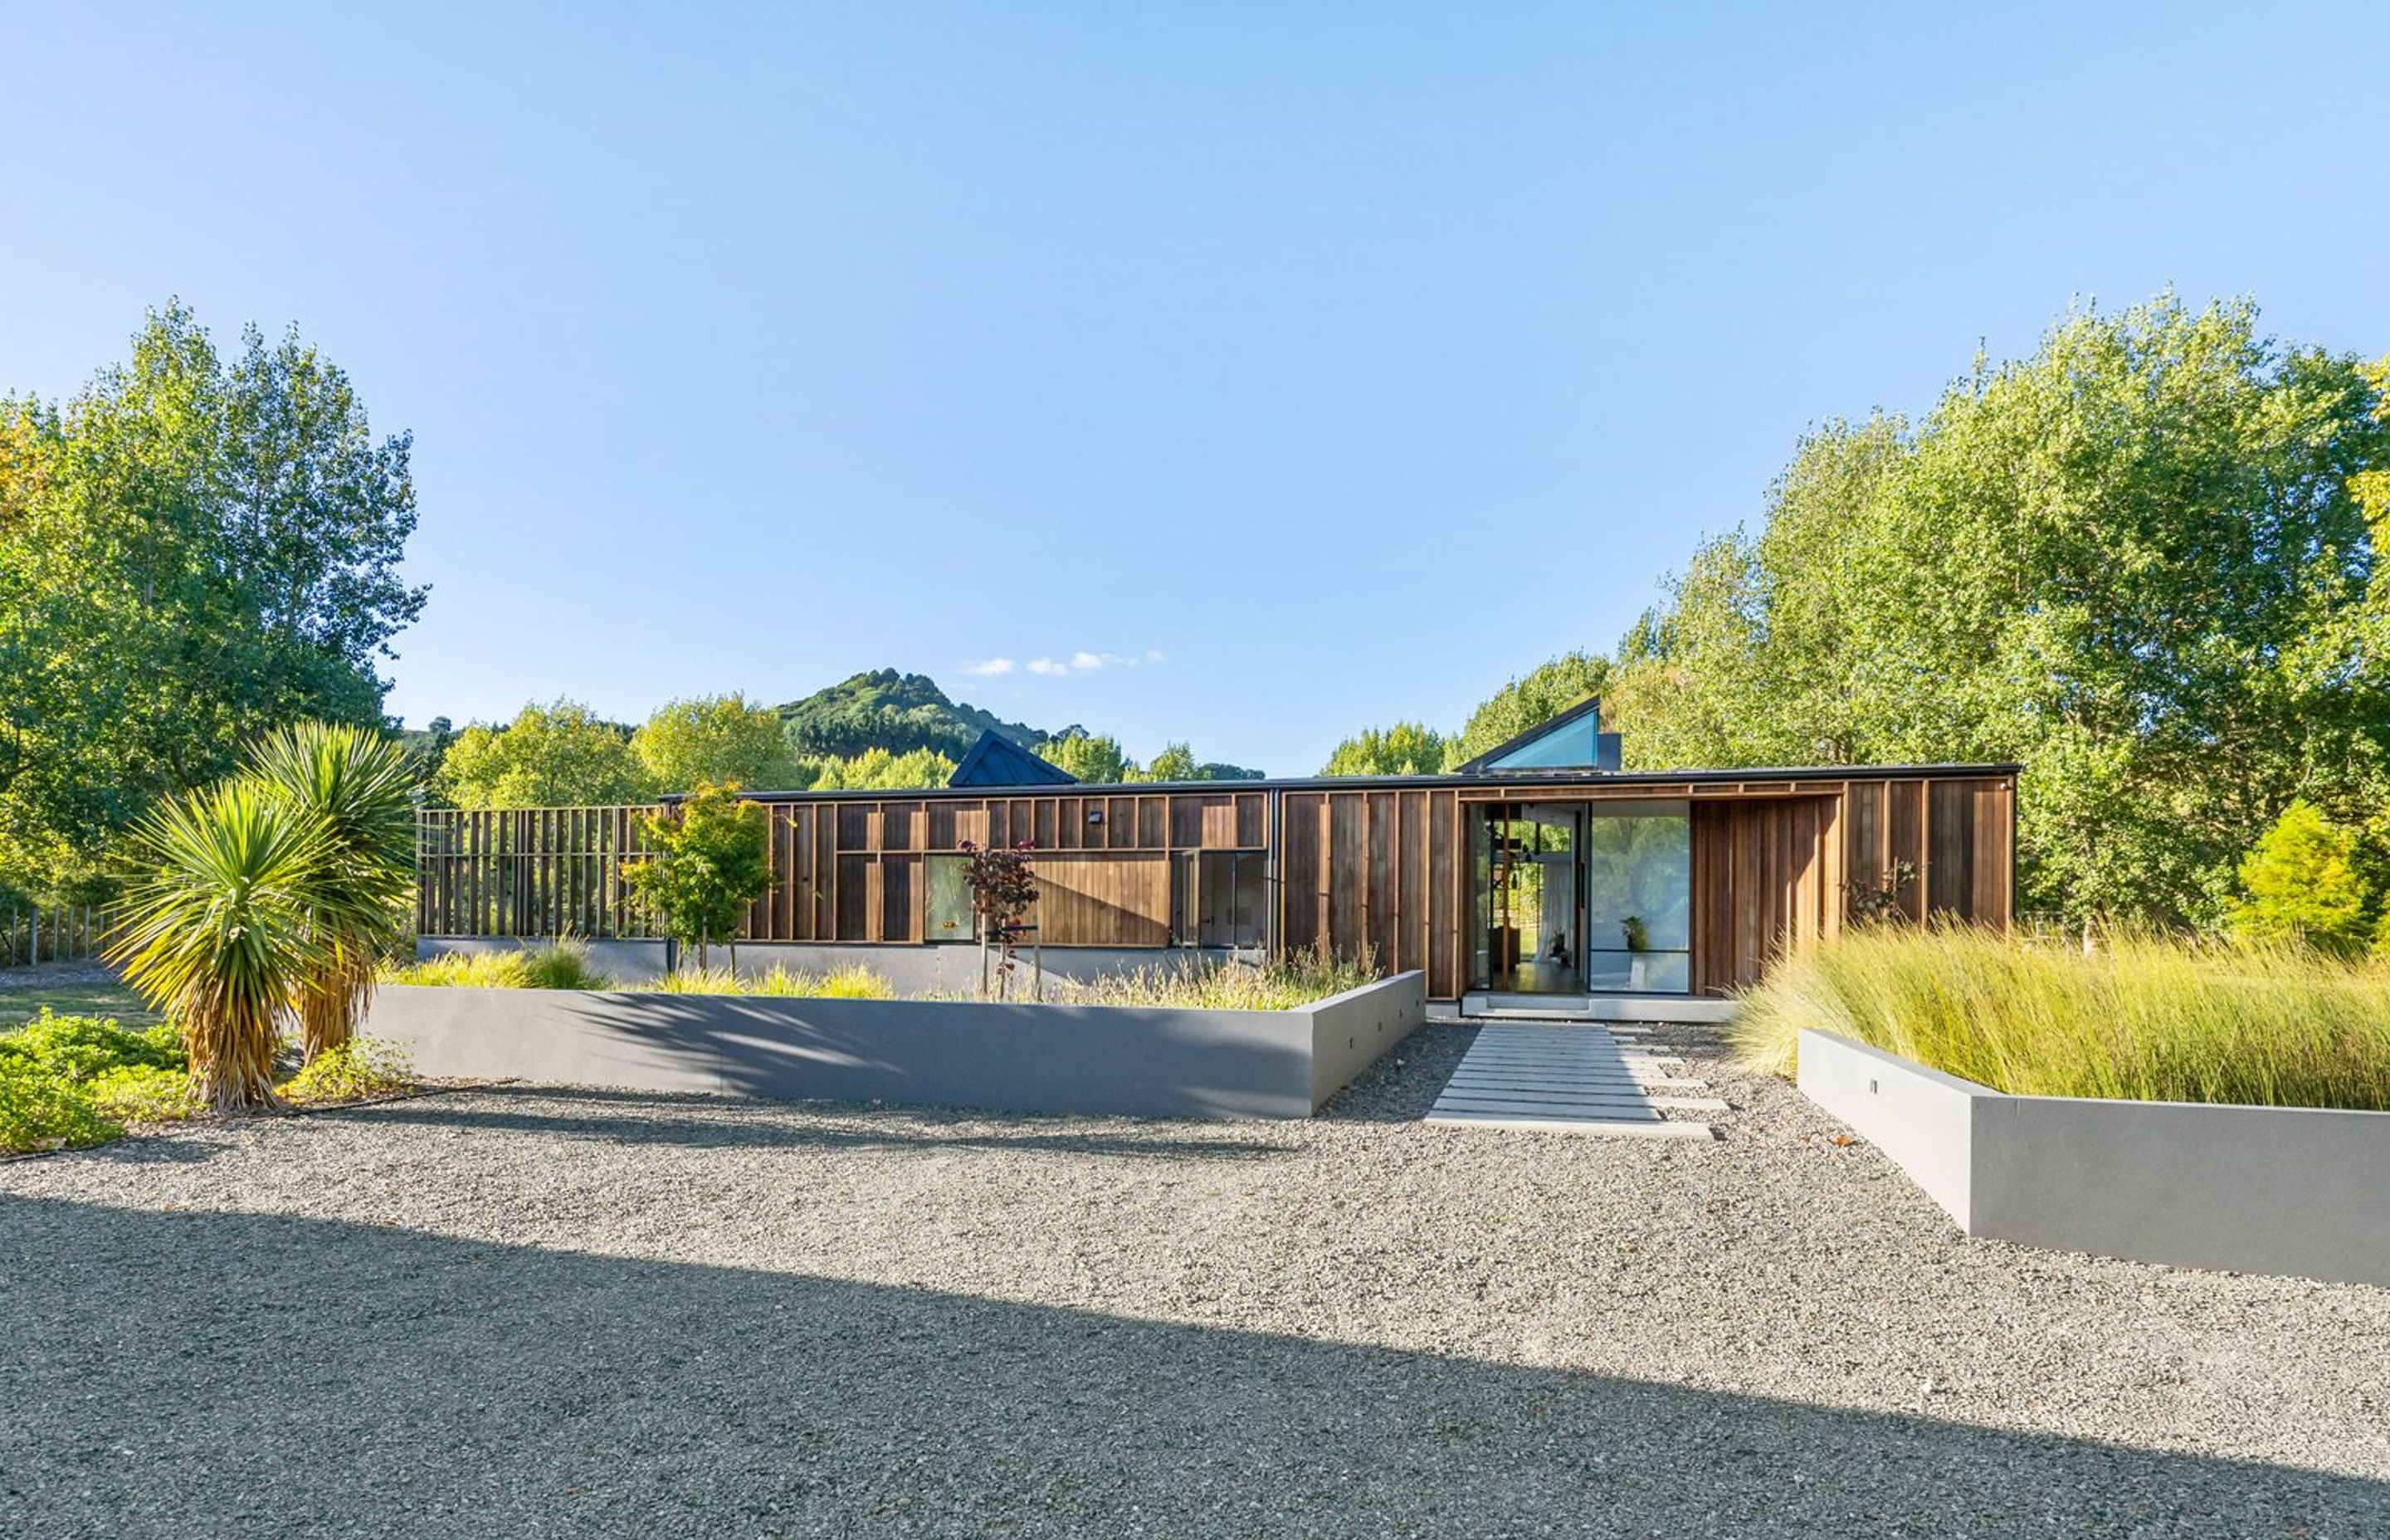 The board-and-batten, cedar-clad house sympathetically blends into its rural surroundings and a landscape planted in native plants and grasses, poplar trees and a fruit orchard.